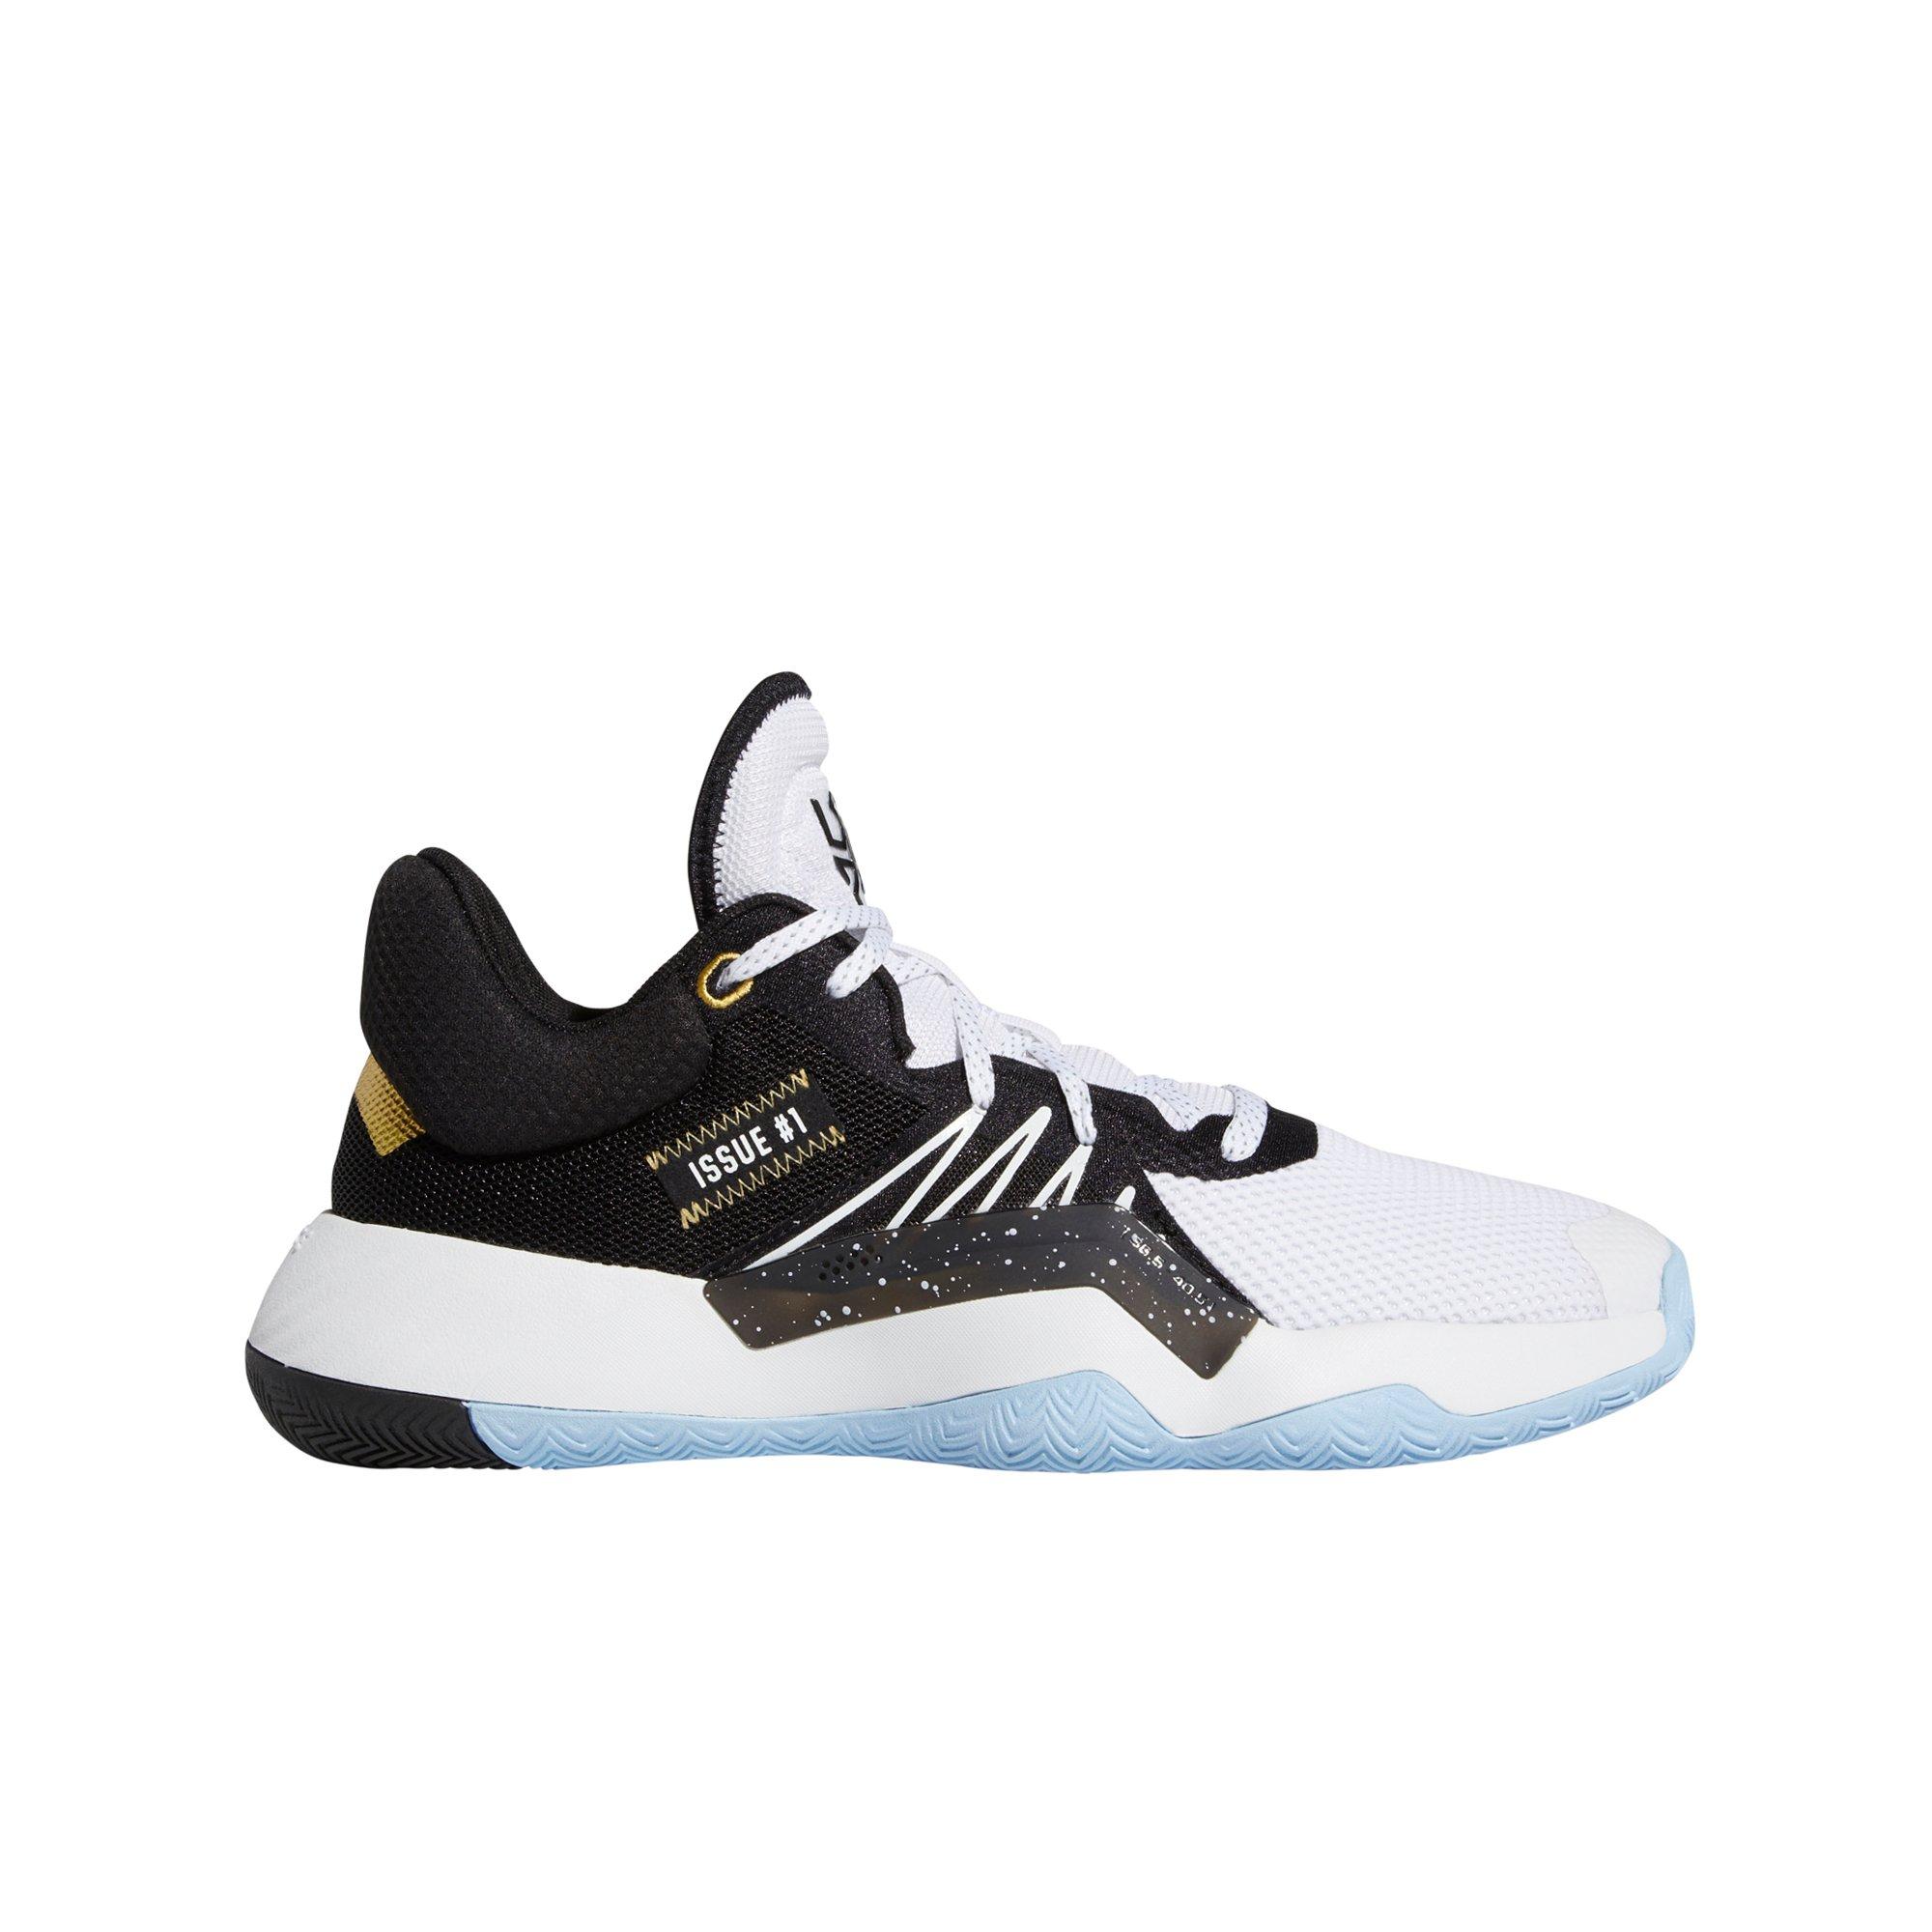 adidas bball shoes